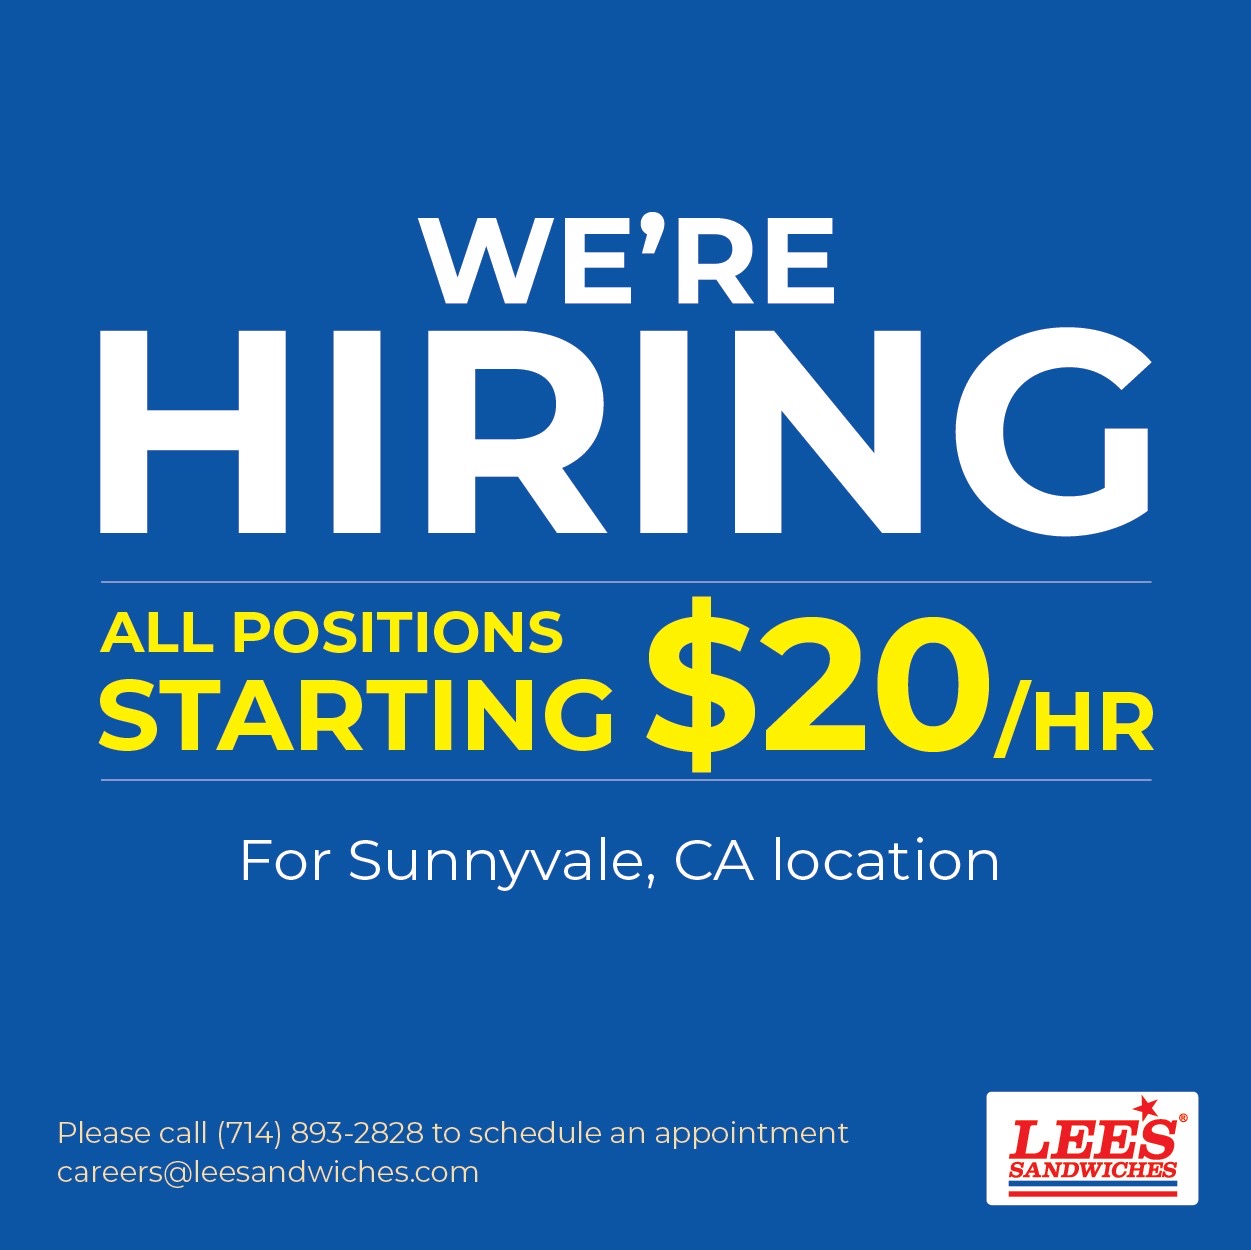 We’re HIRING NOW, please join our team at Sunnyvale, CA location!